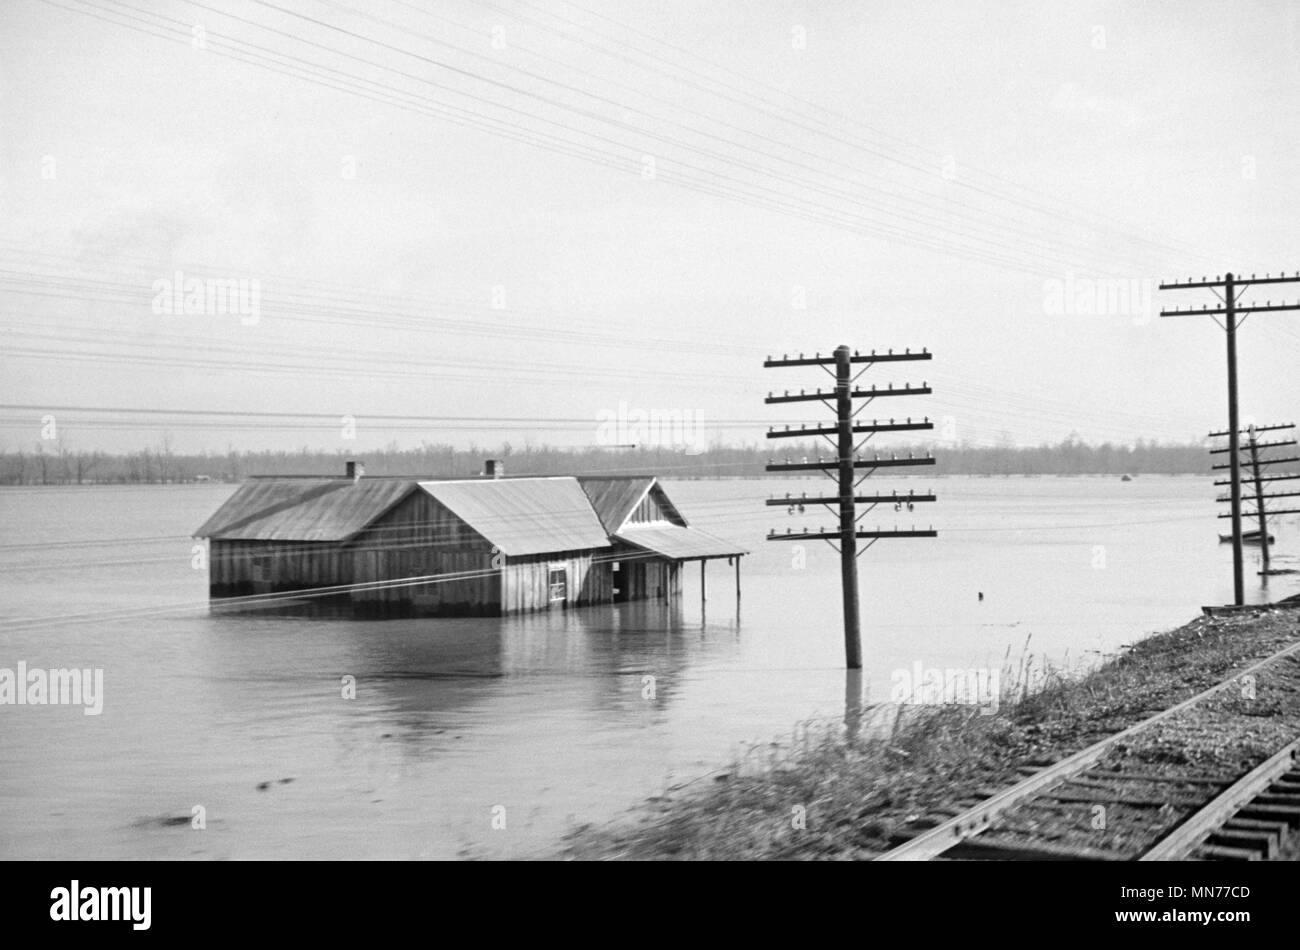 View of Flood from Train en route to Forrest City, Arkansas from Memphis, Tennessee, USA, Edwin Locke for U.S. Resettlement Administration, February 1937 Stock Photo